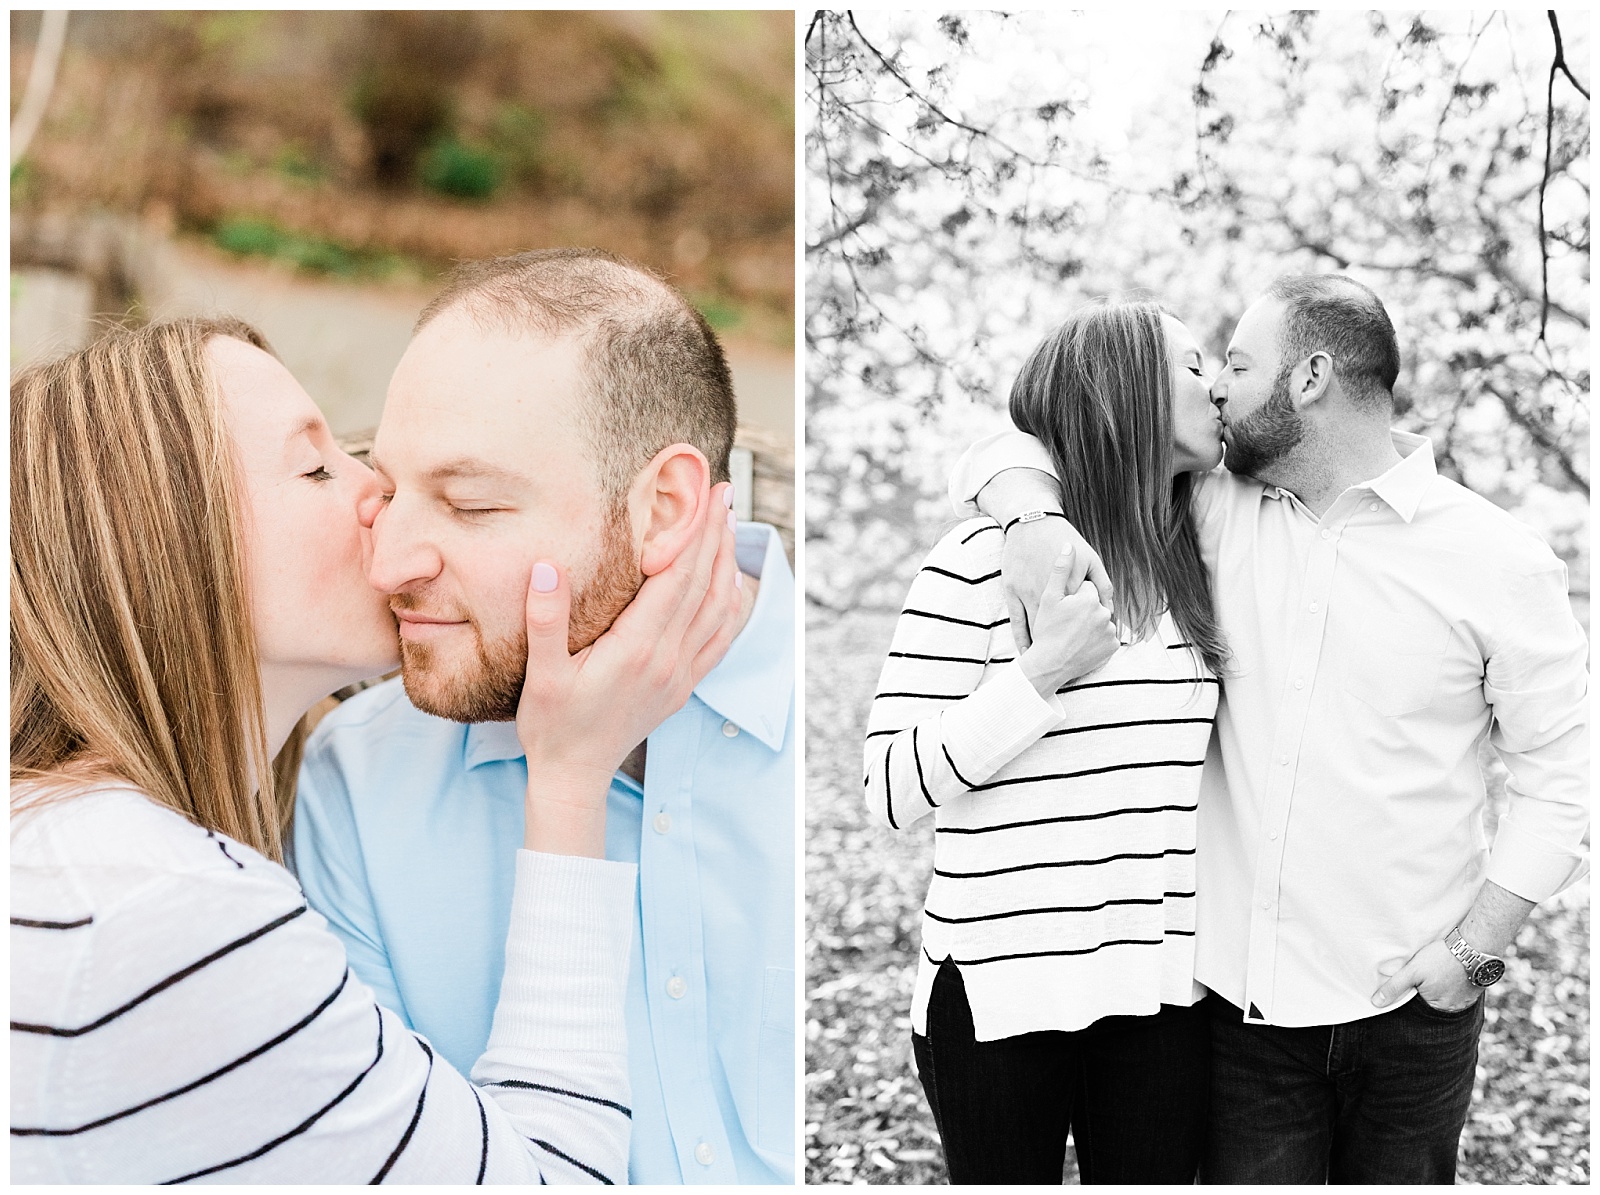 Central Park, NYC engagement session, springtime, wedding photographer, New York, kiss, in love, cherry blossom